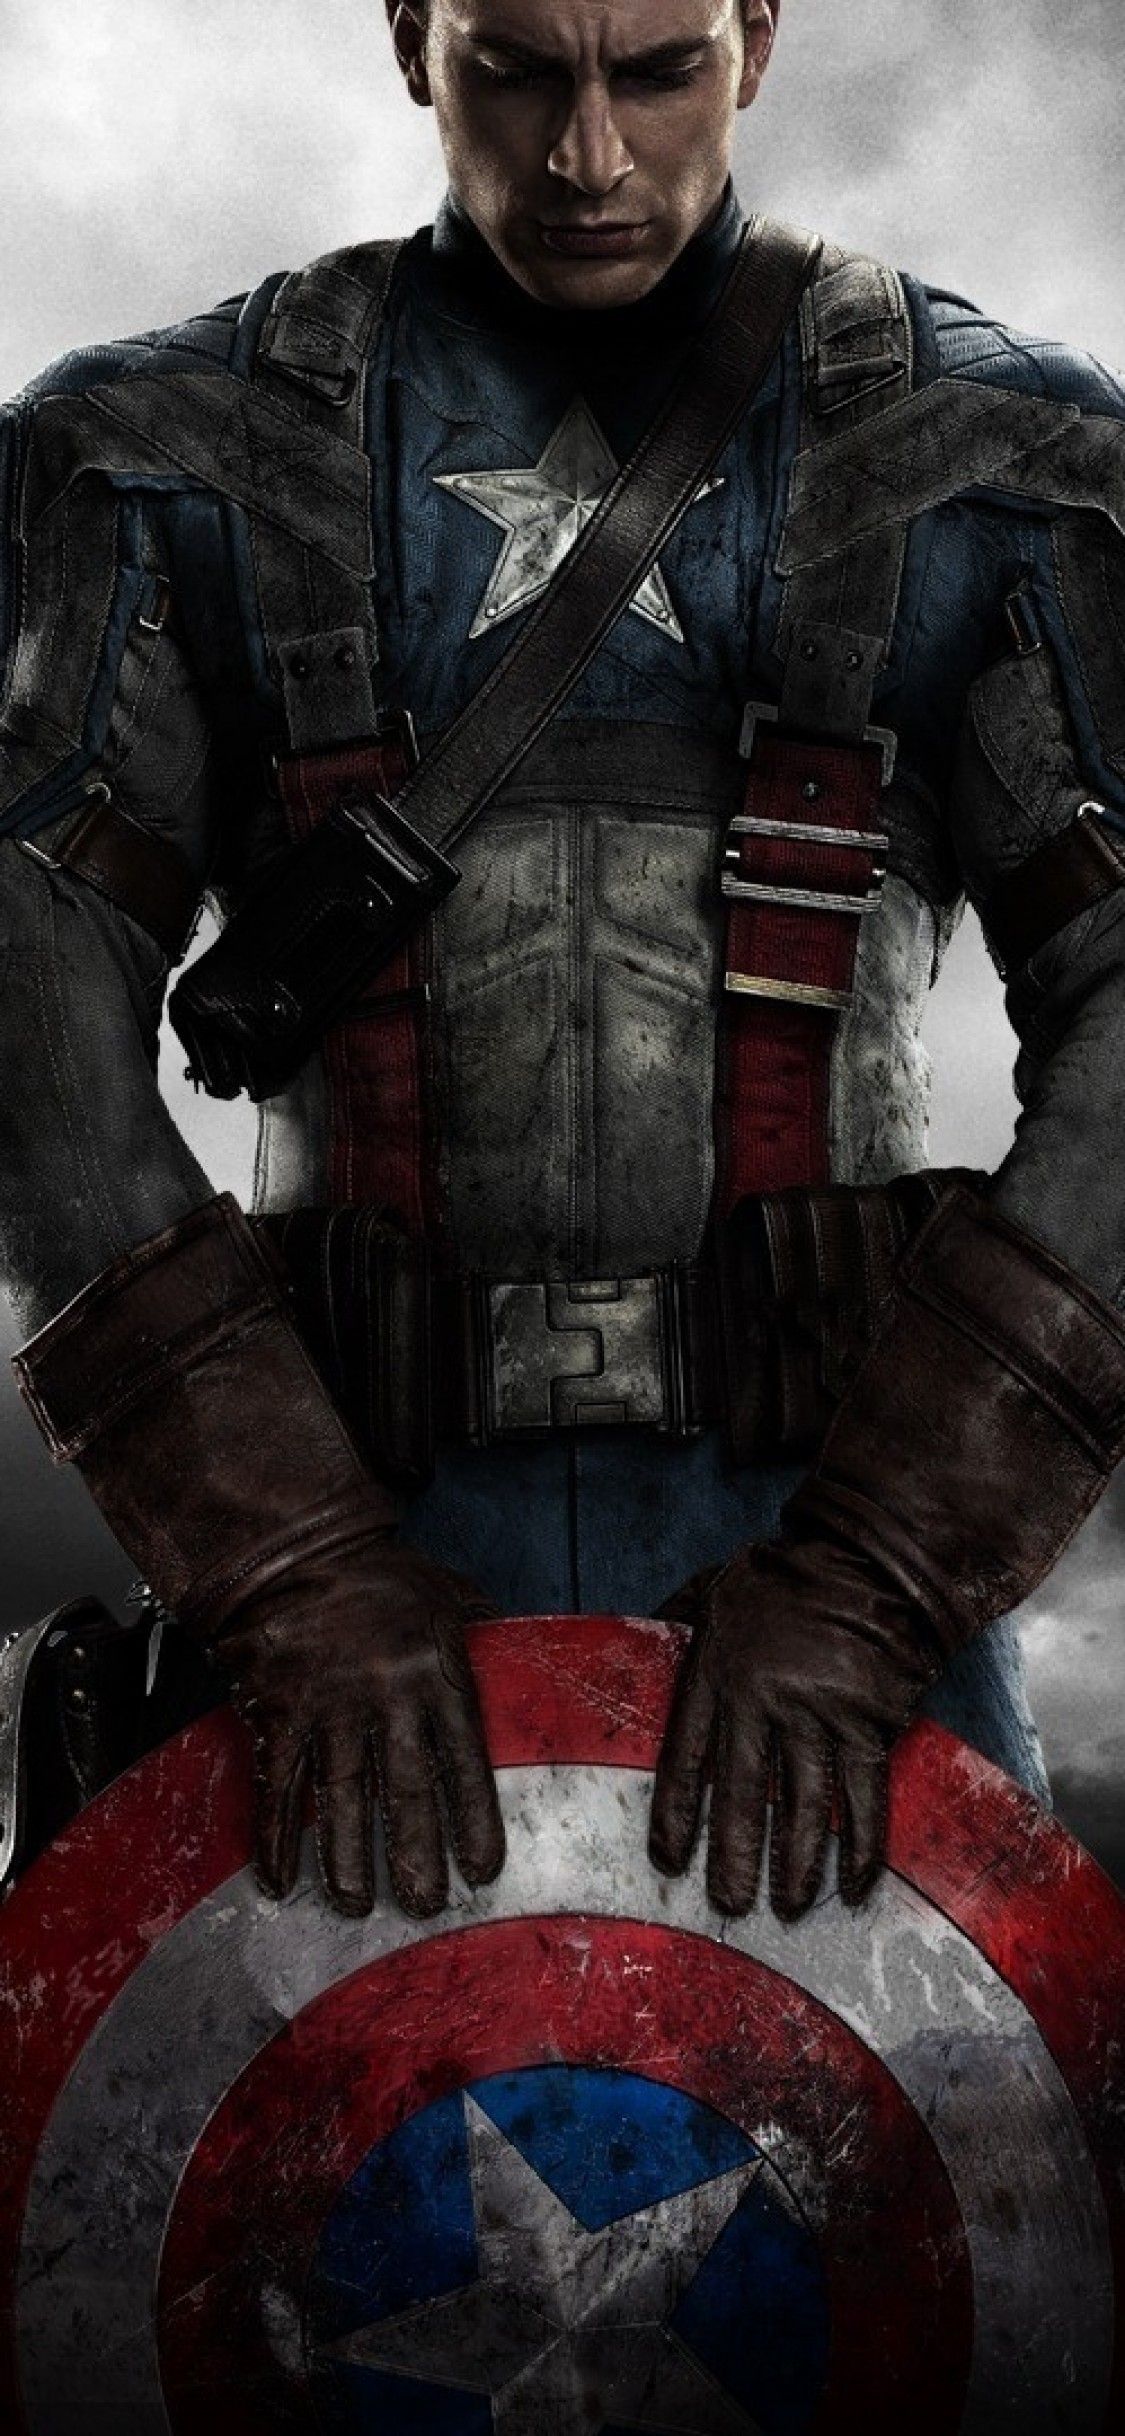 Download 1125x2436 Captain America: The First Avenger, Chris Evans, Shield, Clouds Wallpaper for iPhone X